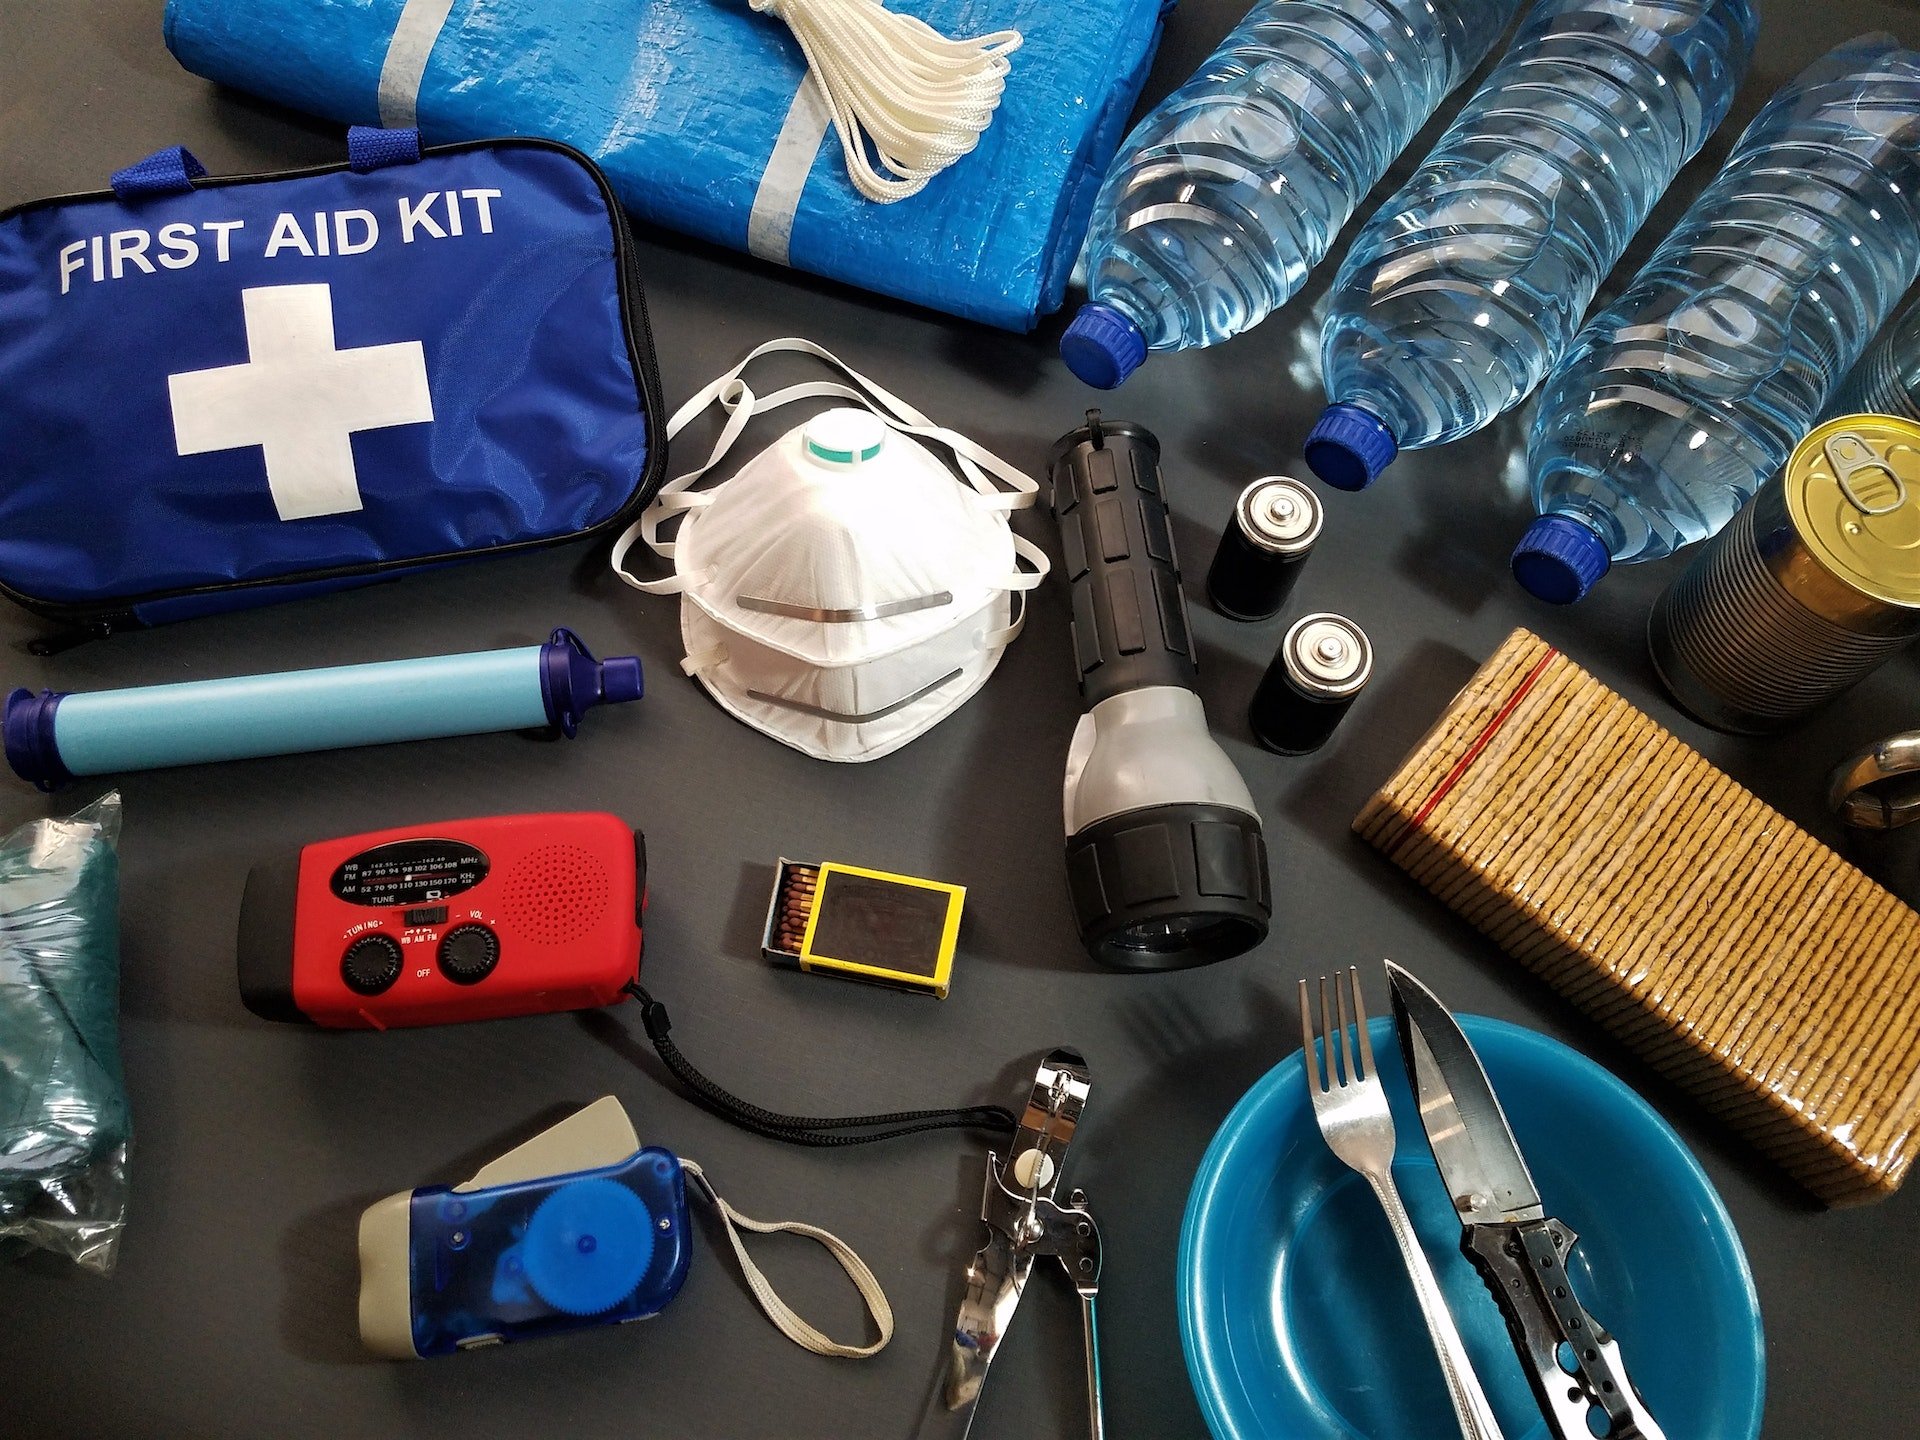 Winter Survival Kit Items To Keep In Your Vehicle